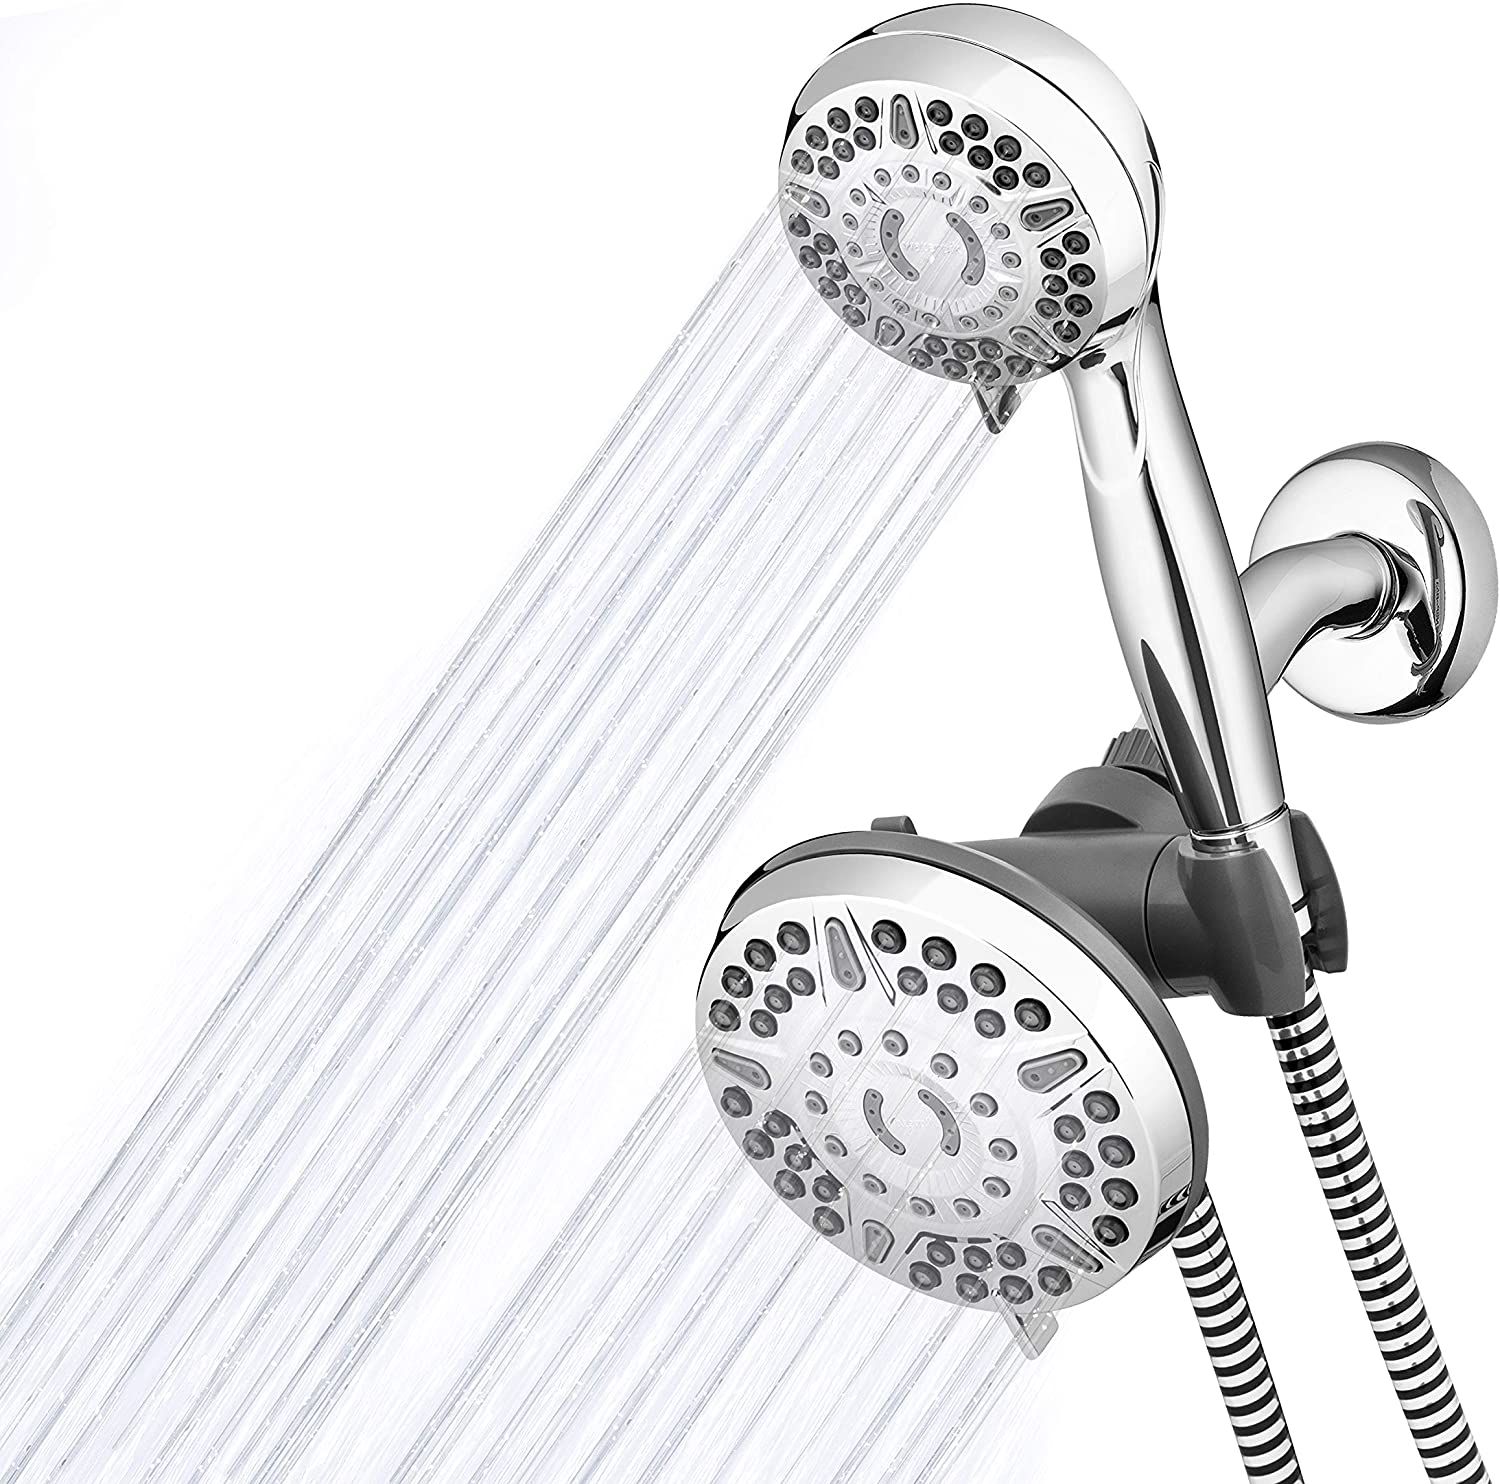 Waterpik Power Pulse 2-in-1 Dual Shower Head System, 2.5 GPM $17.52 + FS w/ Prime or Walmart+ (not avail in all areas)